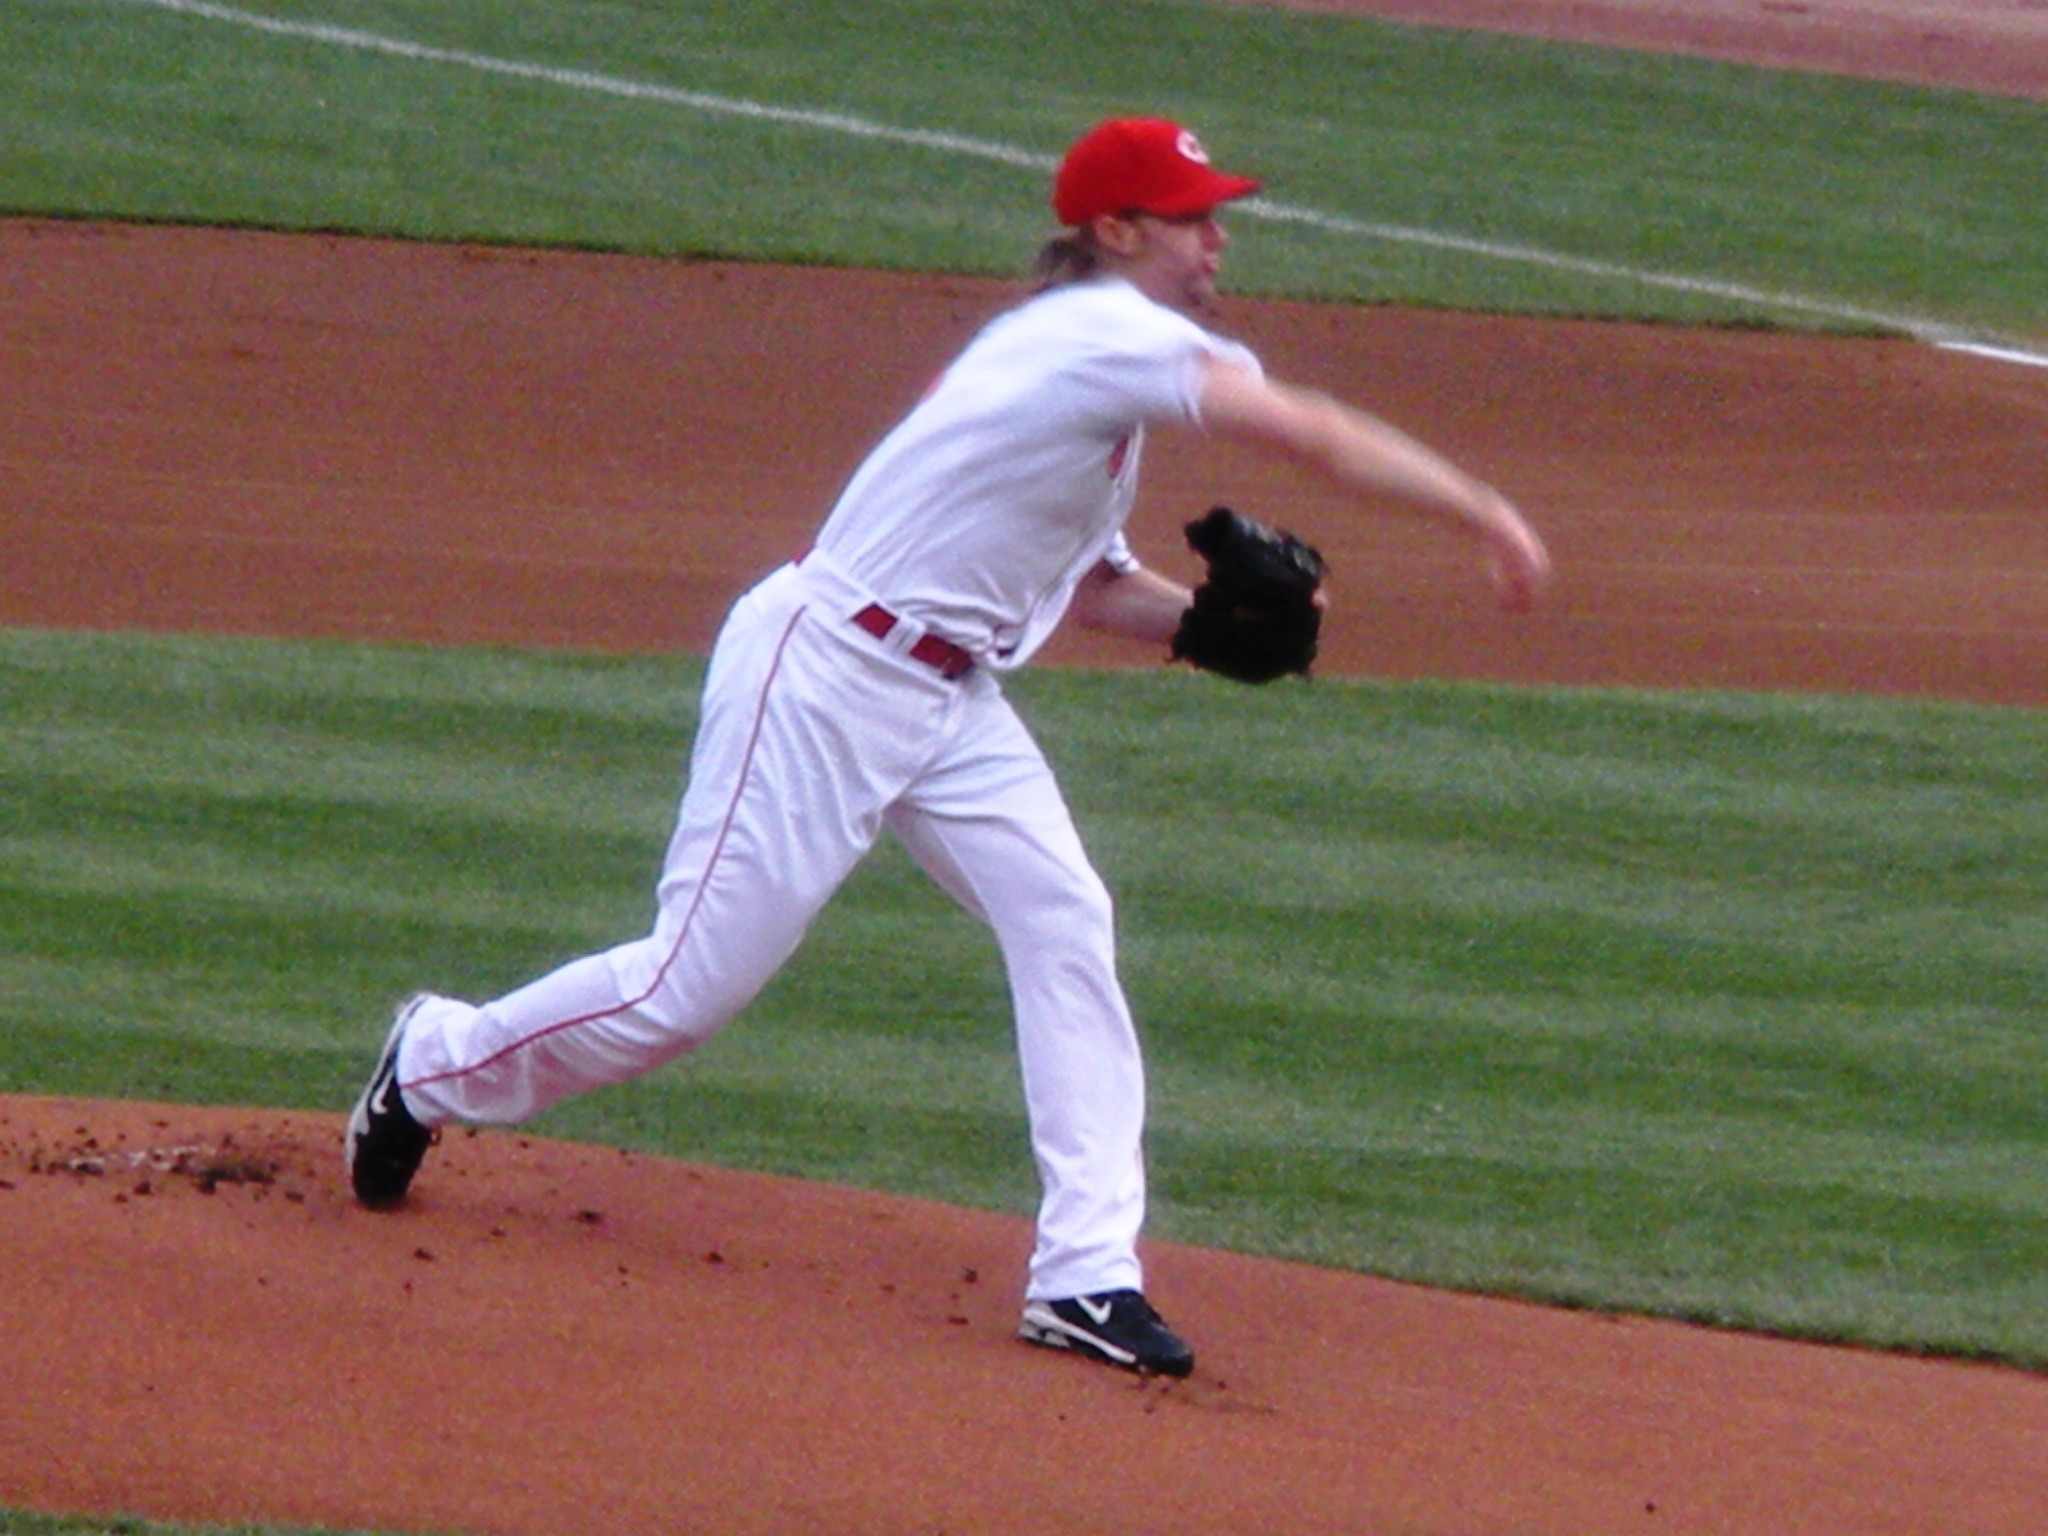 Bronson Arroyo elected to Reds Hall of Fame